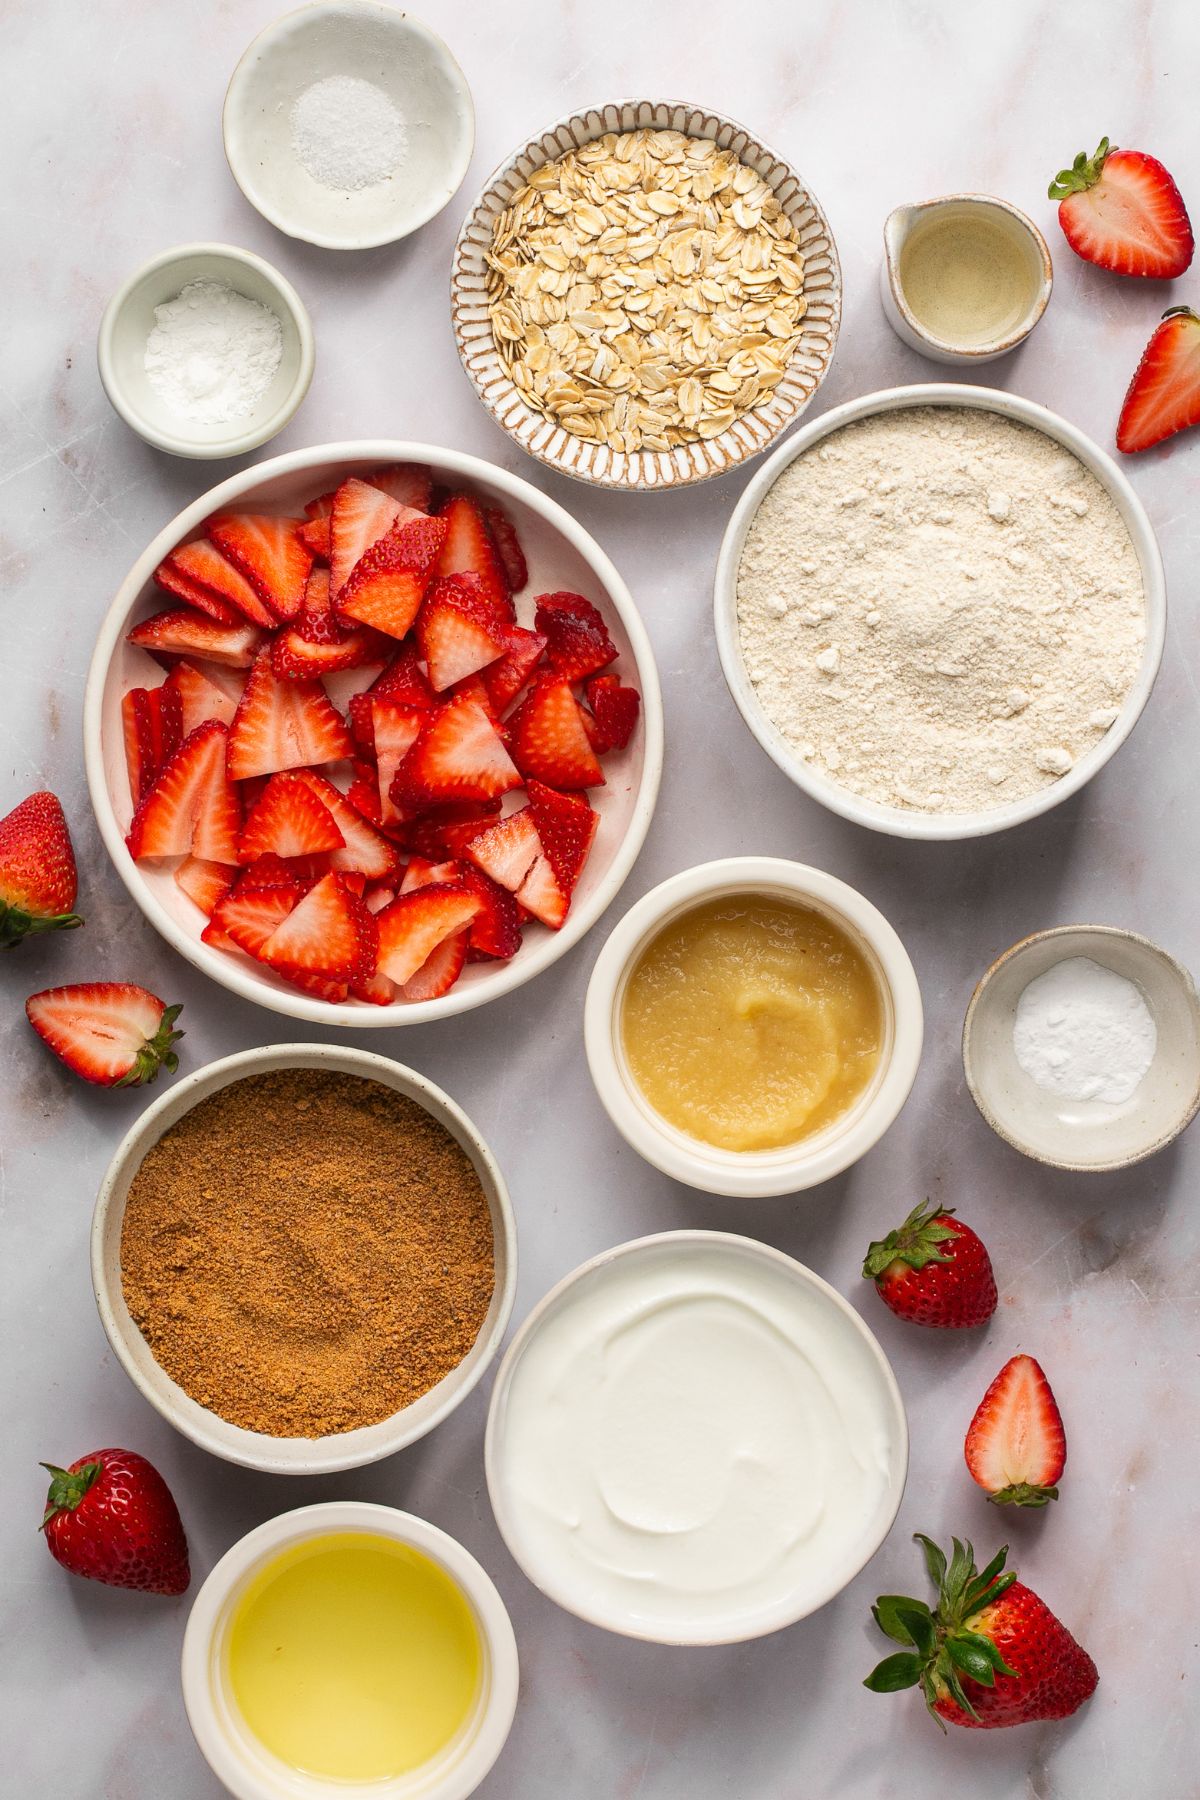 Ingredients to make strawberry cookies on the table before mixing.